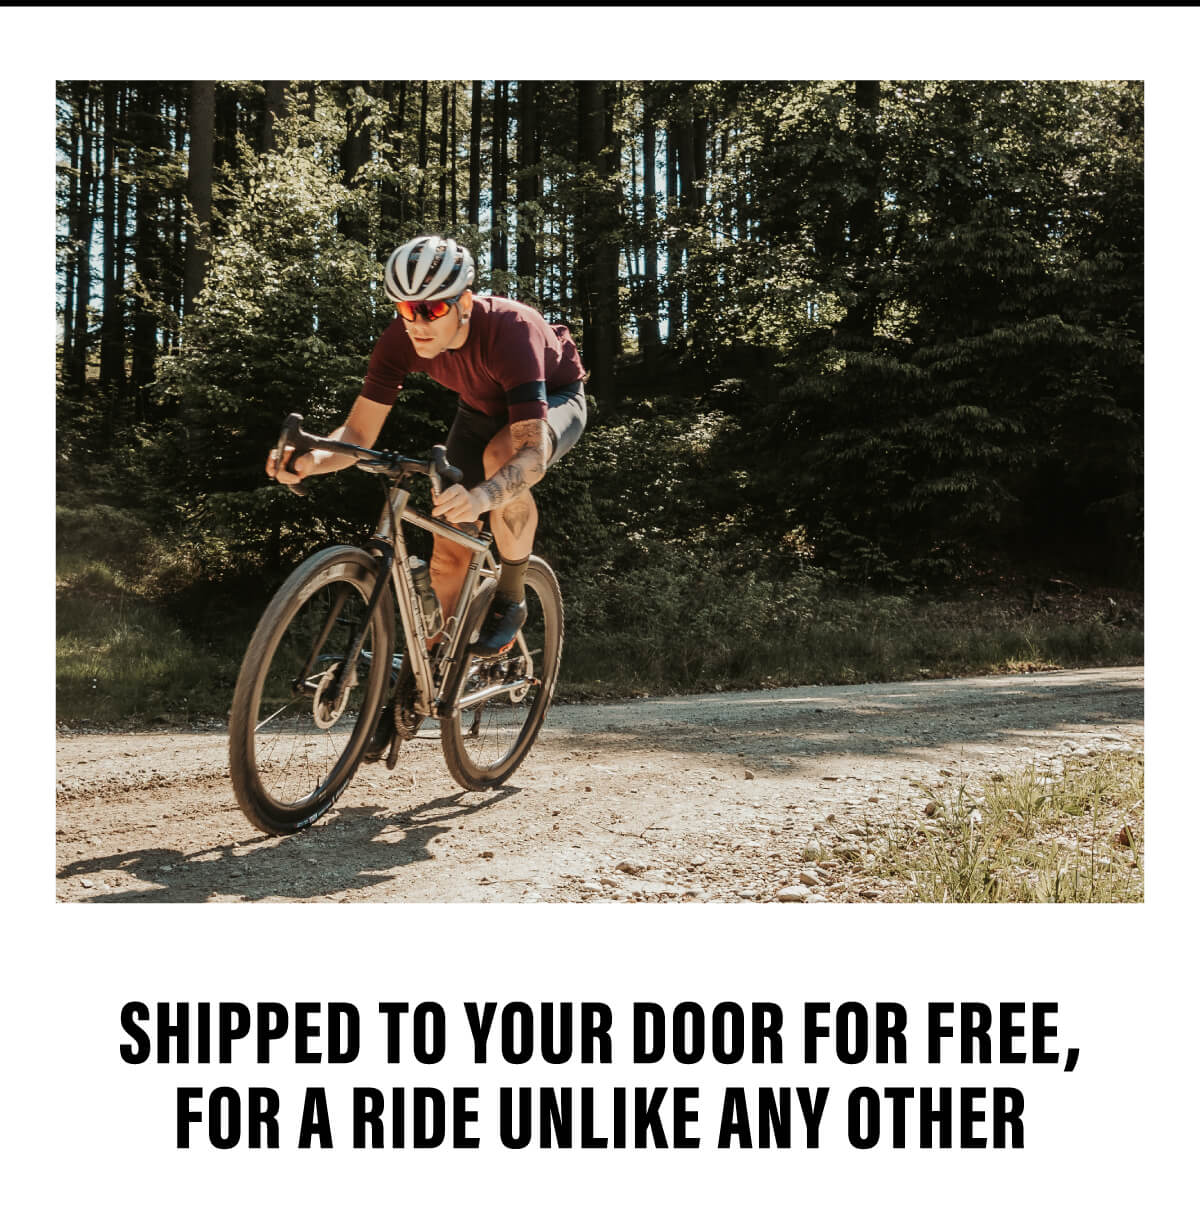 Shipped to your door for free, for a ride unlike any other.